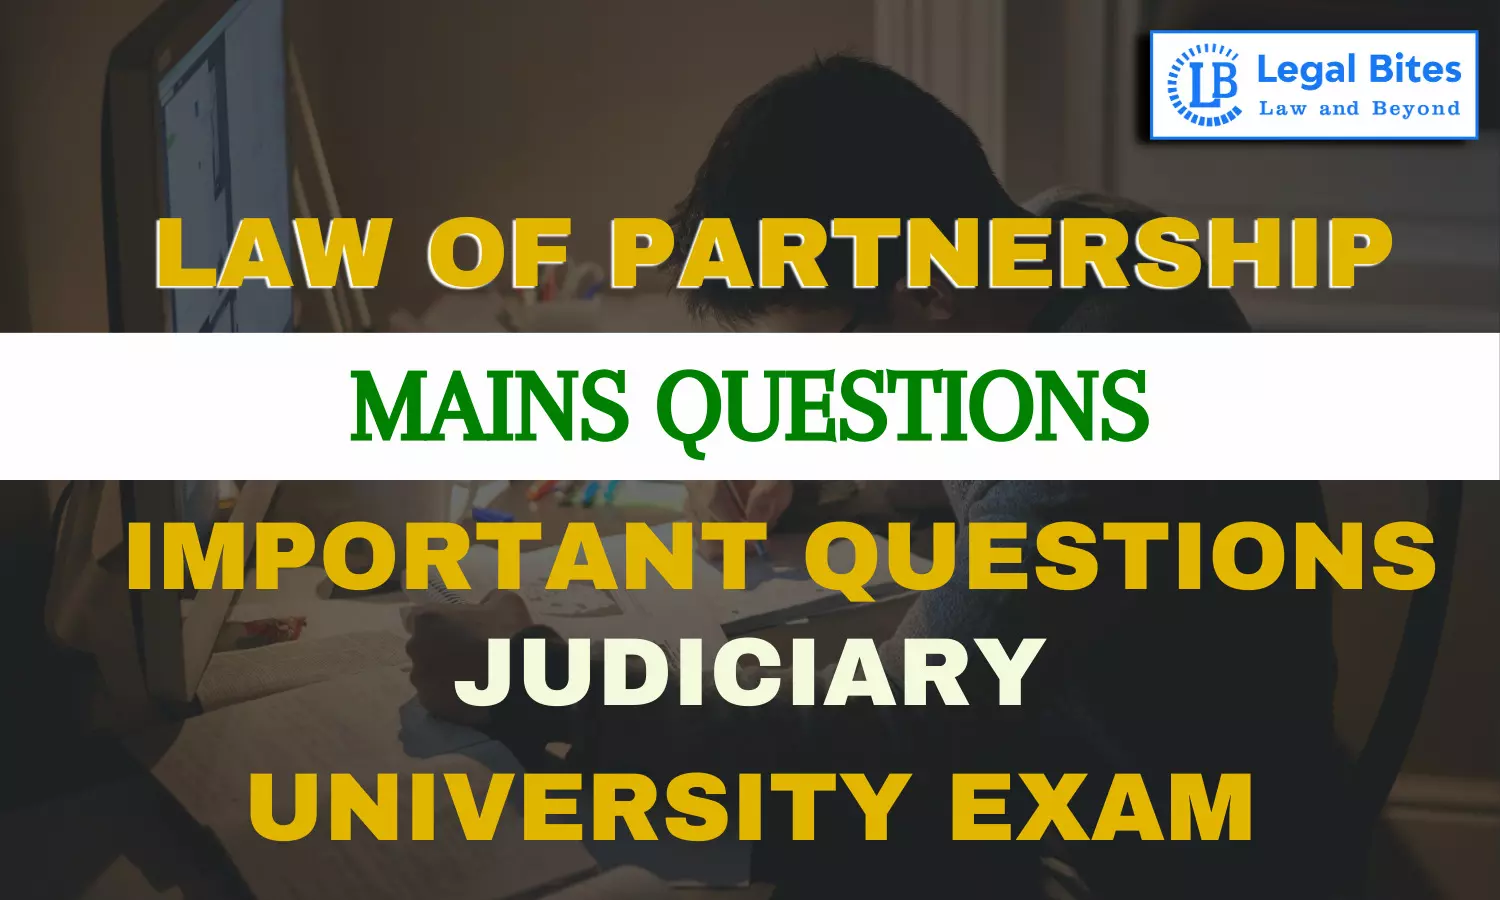 Can a minor be partner in a firm? If so, discuss his position before attaining majority and after attaining majority?